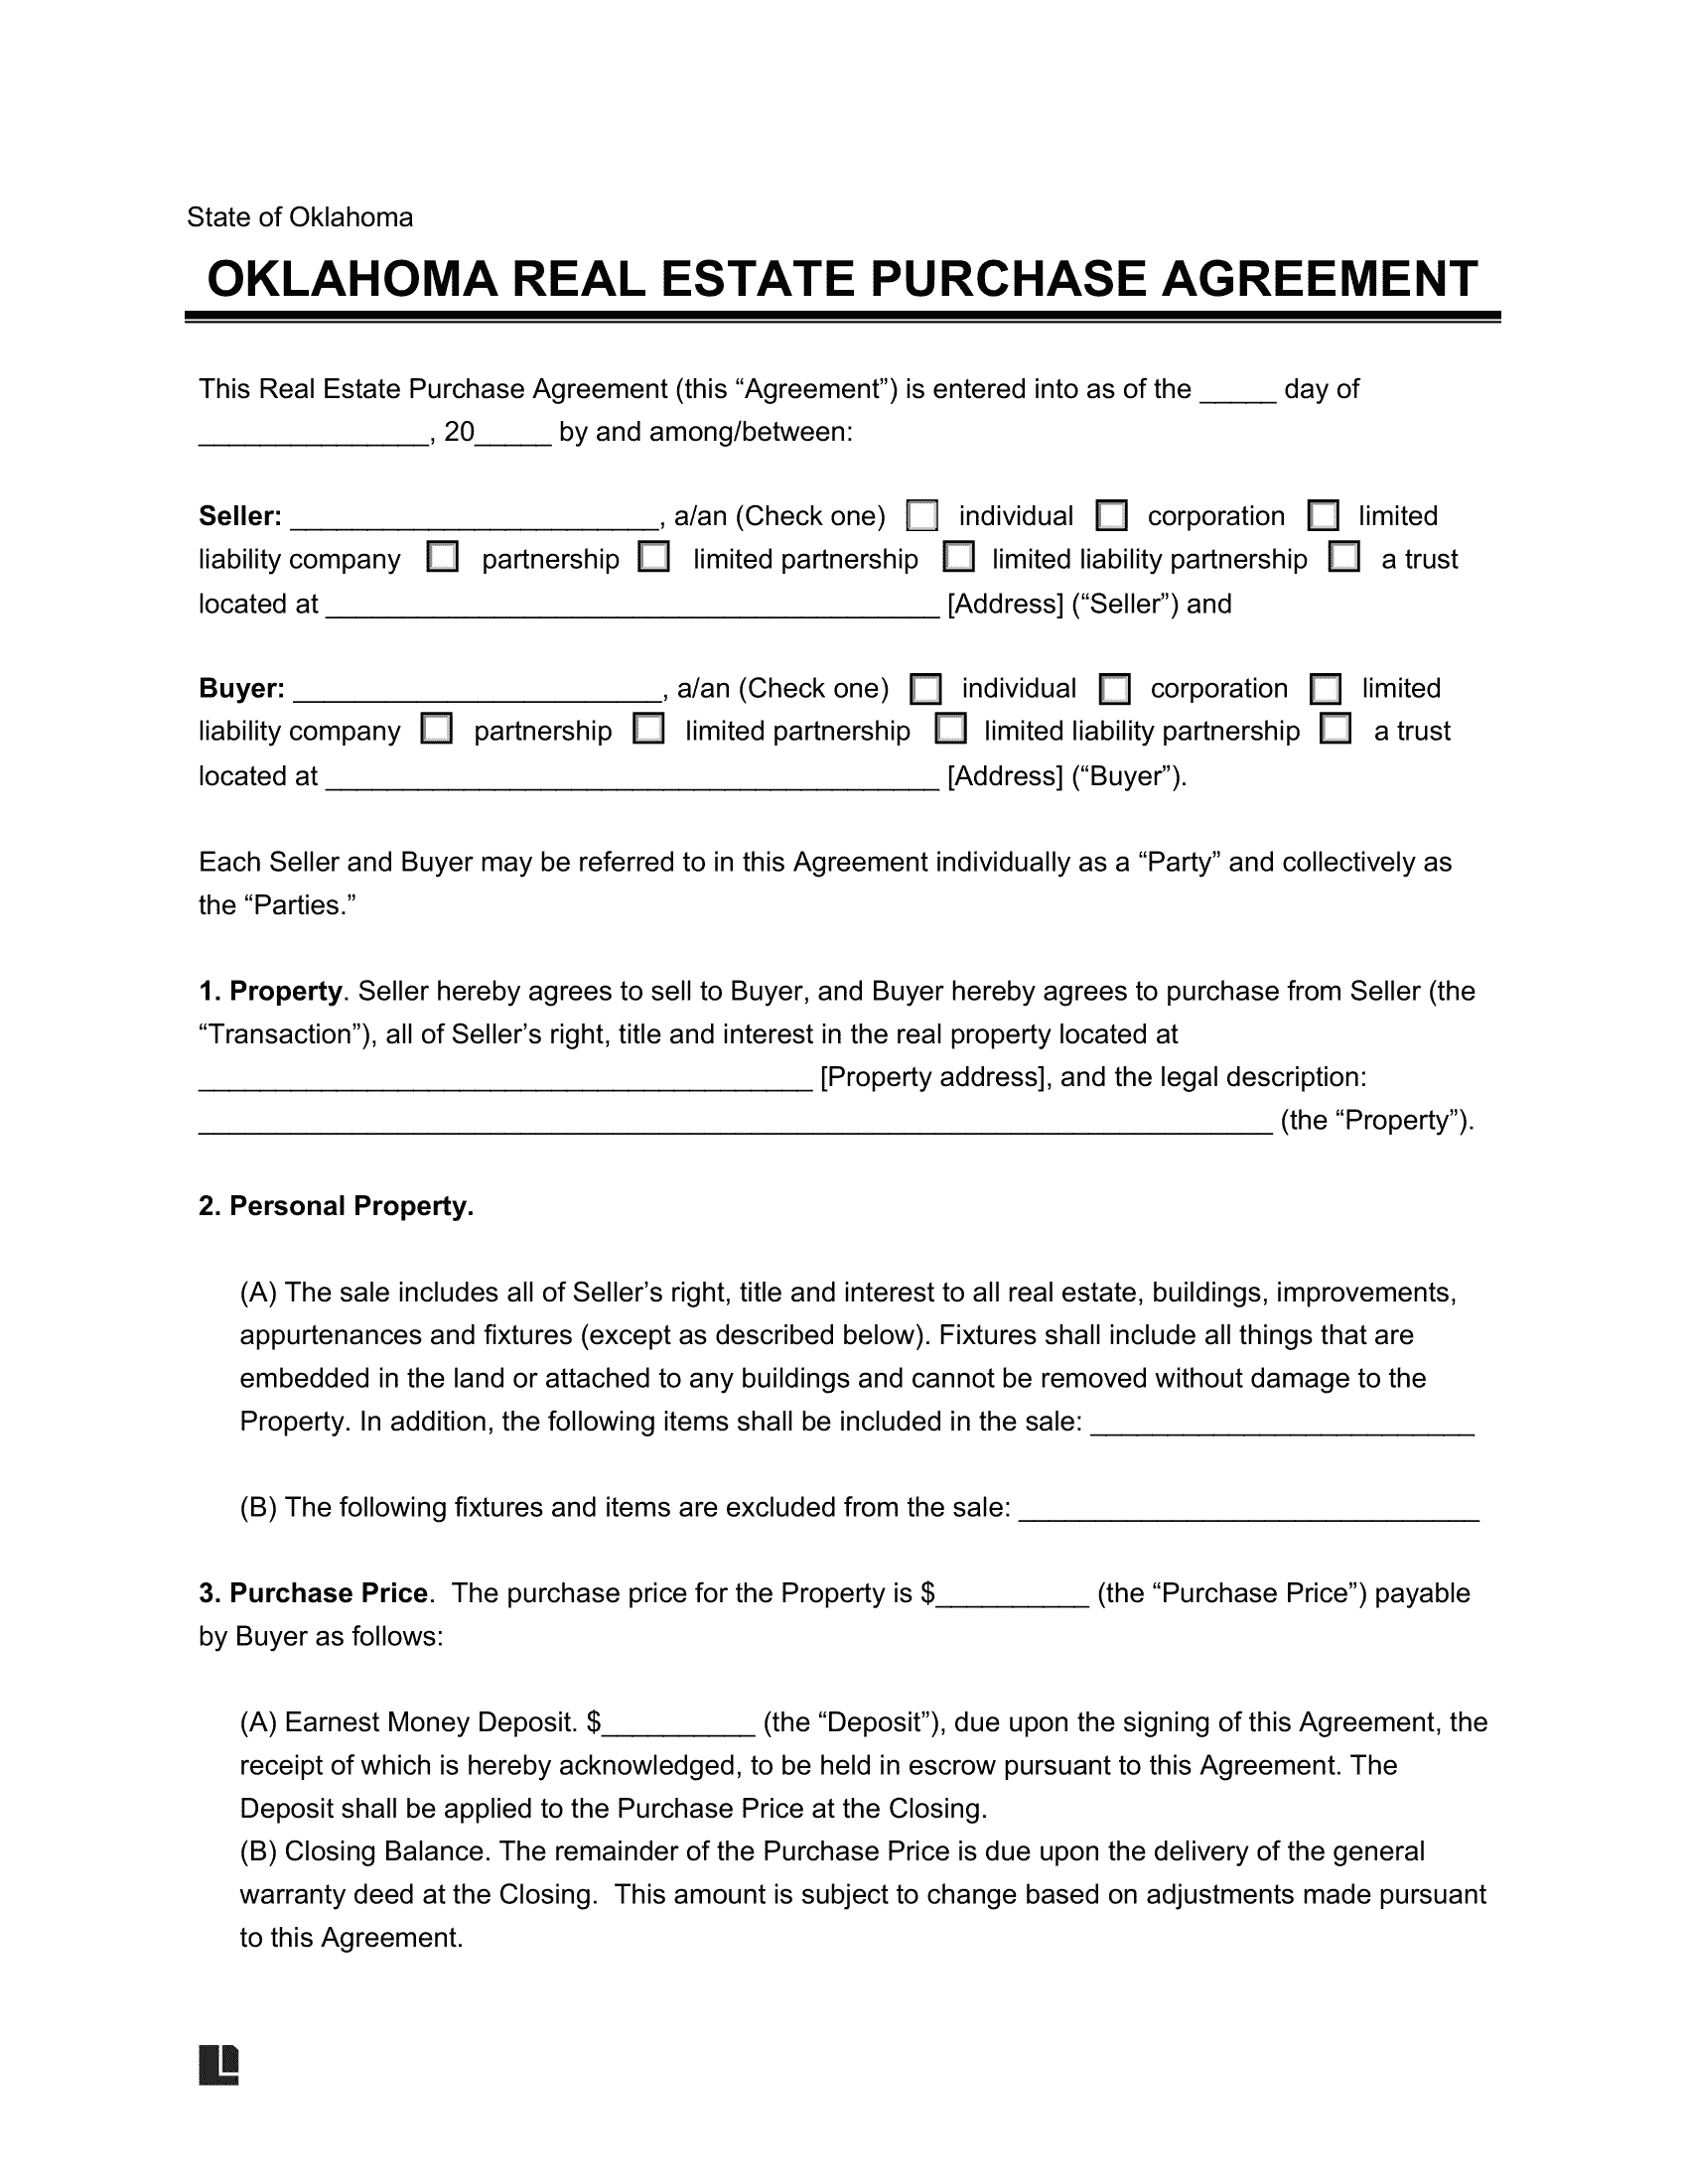 Oklahoma Residential Purchase Agreement Template